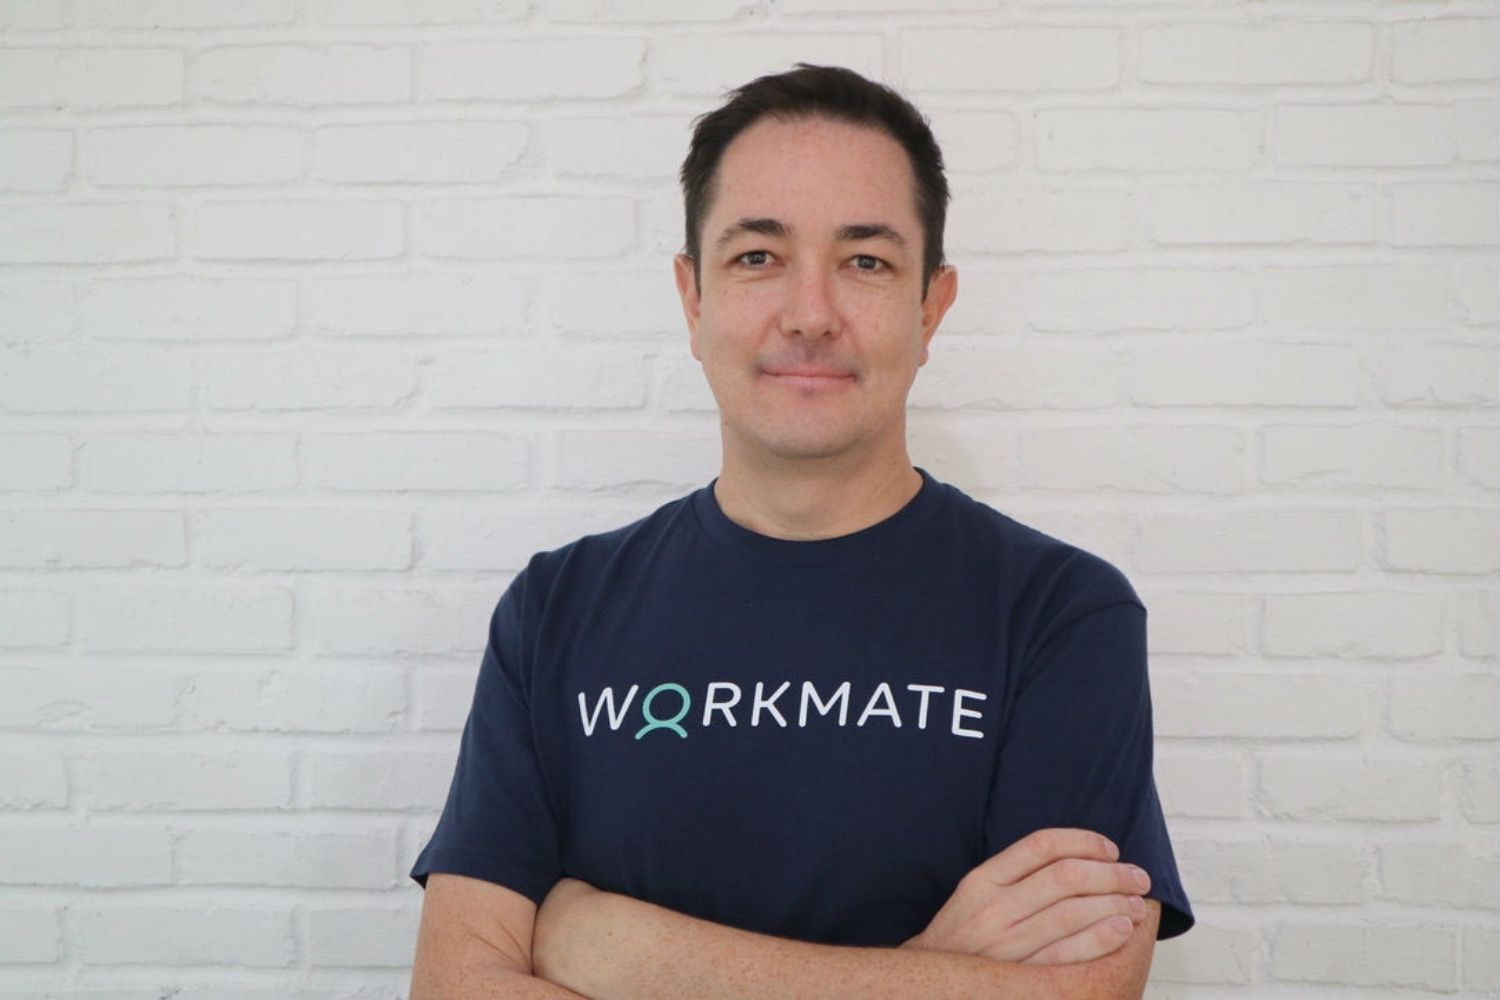 Workmate CEO Mathew Ward on content marketing, startups, and finding a niche